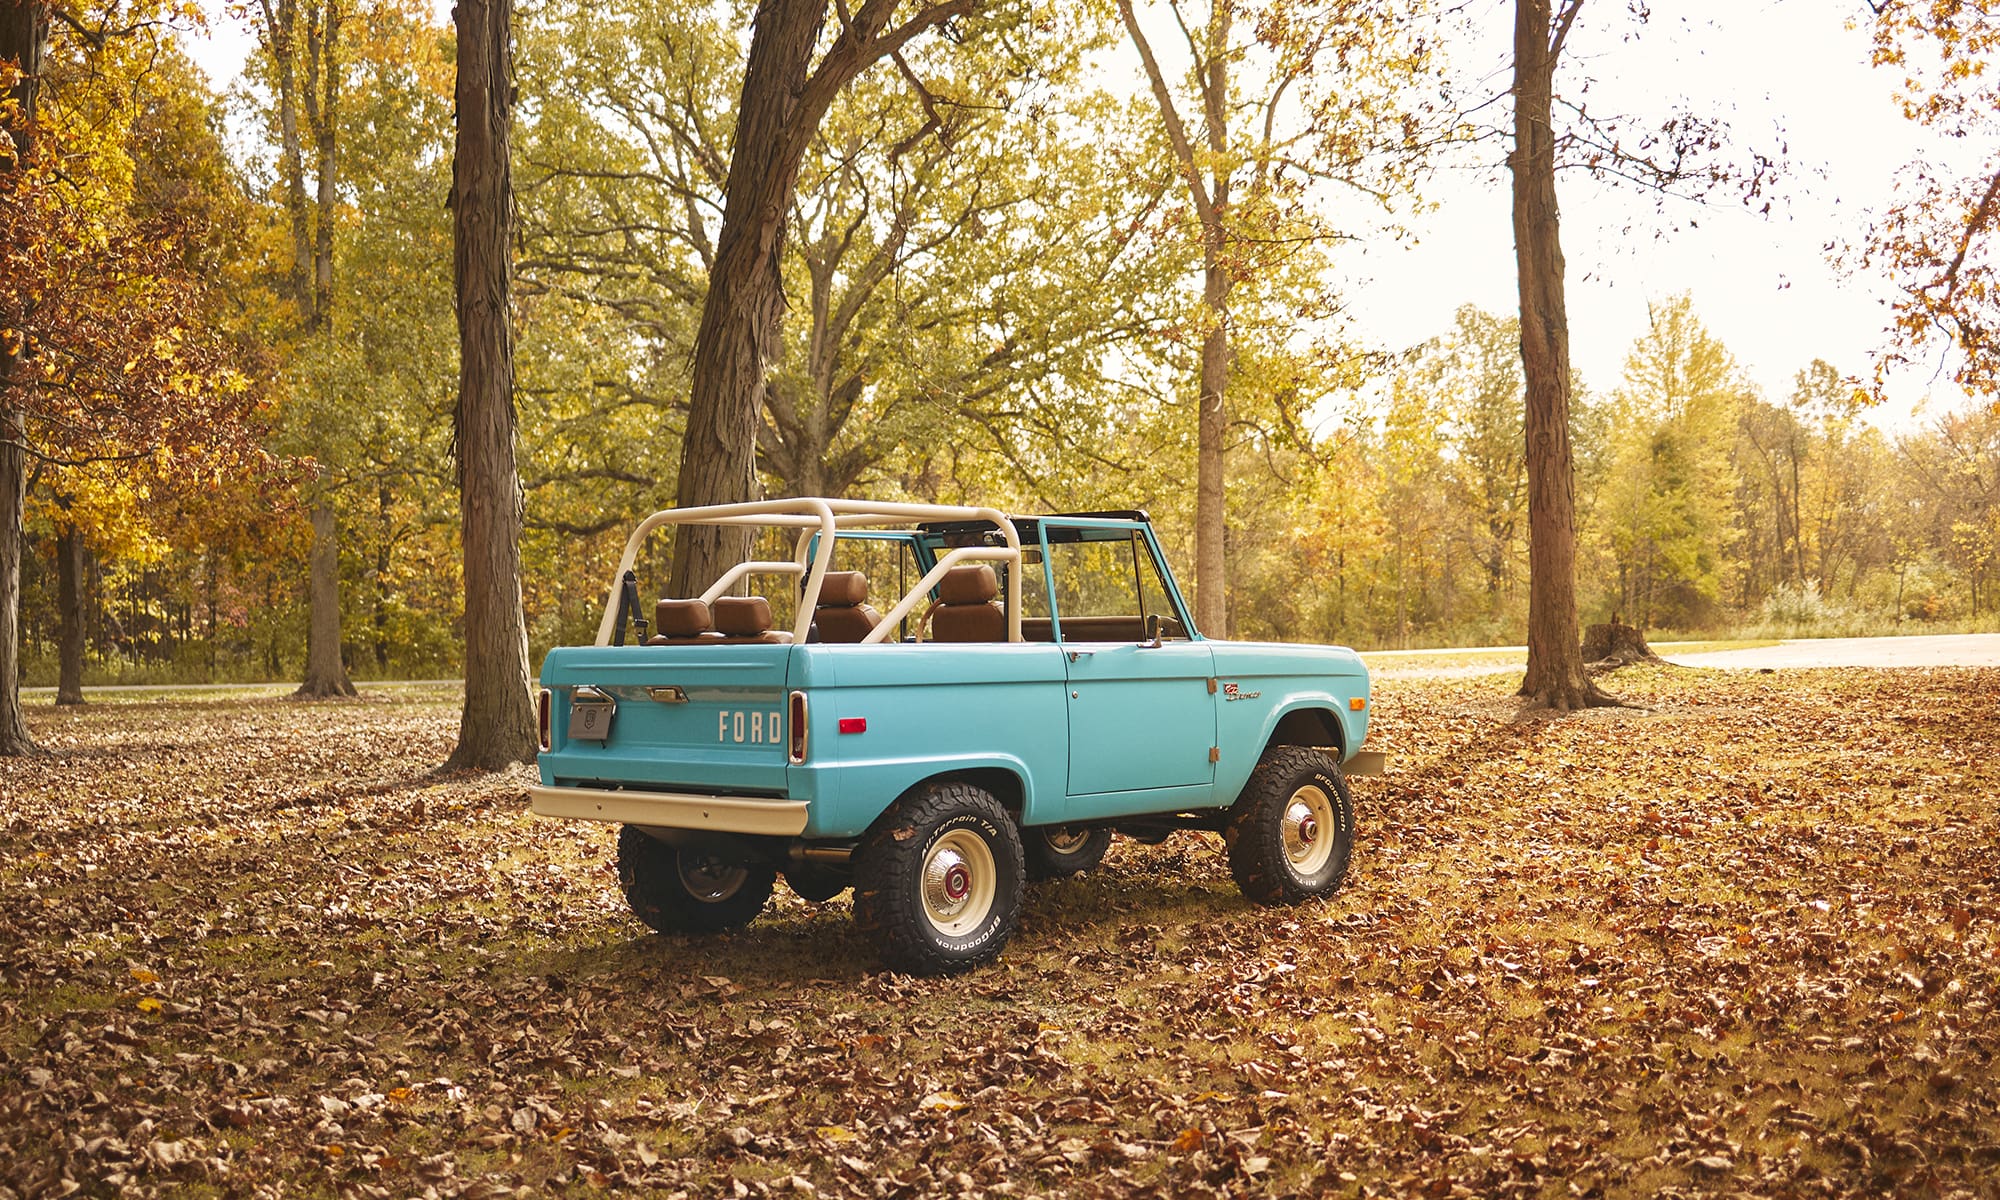 1970-heritage-blue-classic-ford-bronco-302-series-woods-3